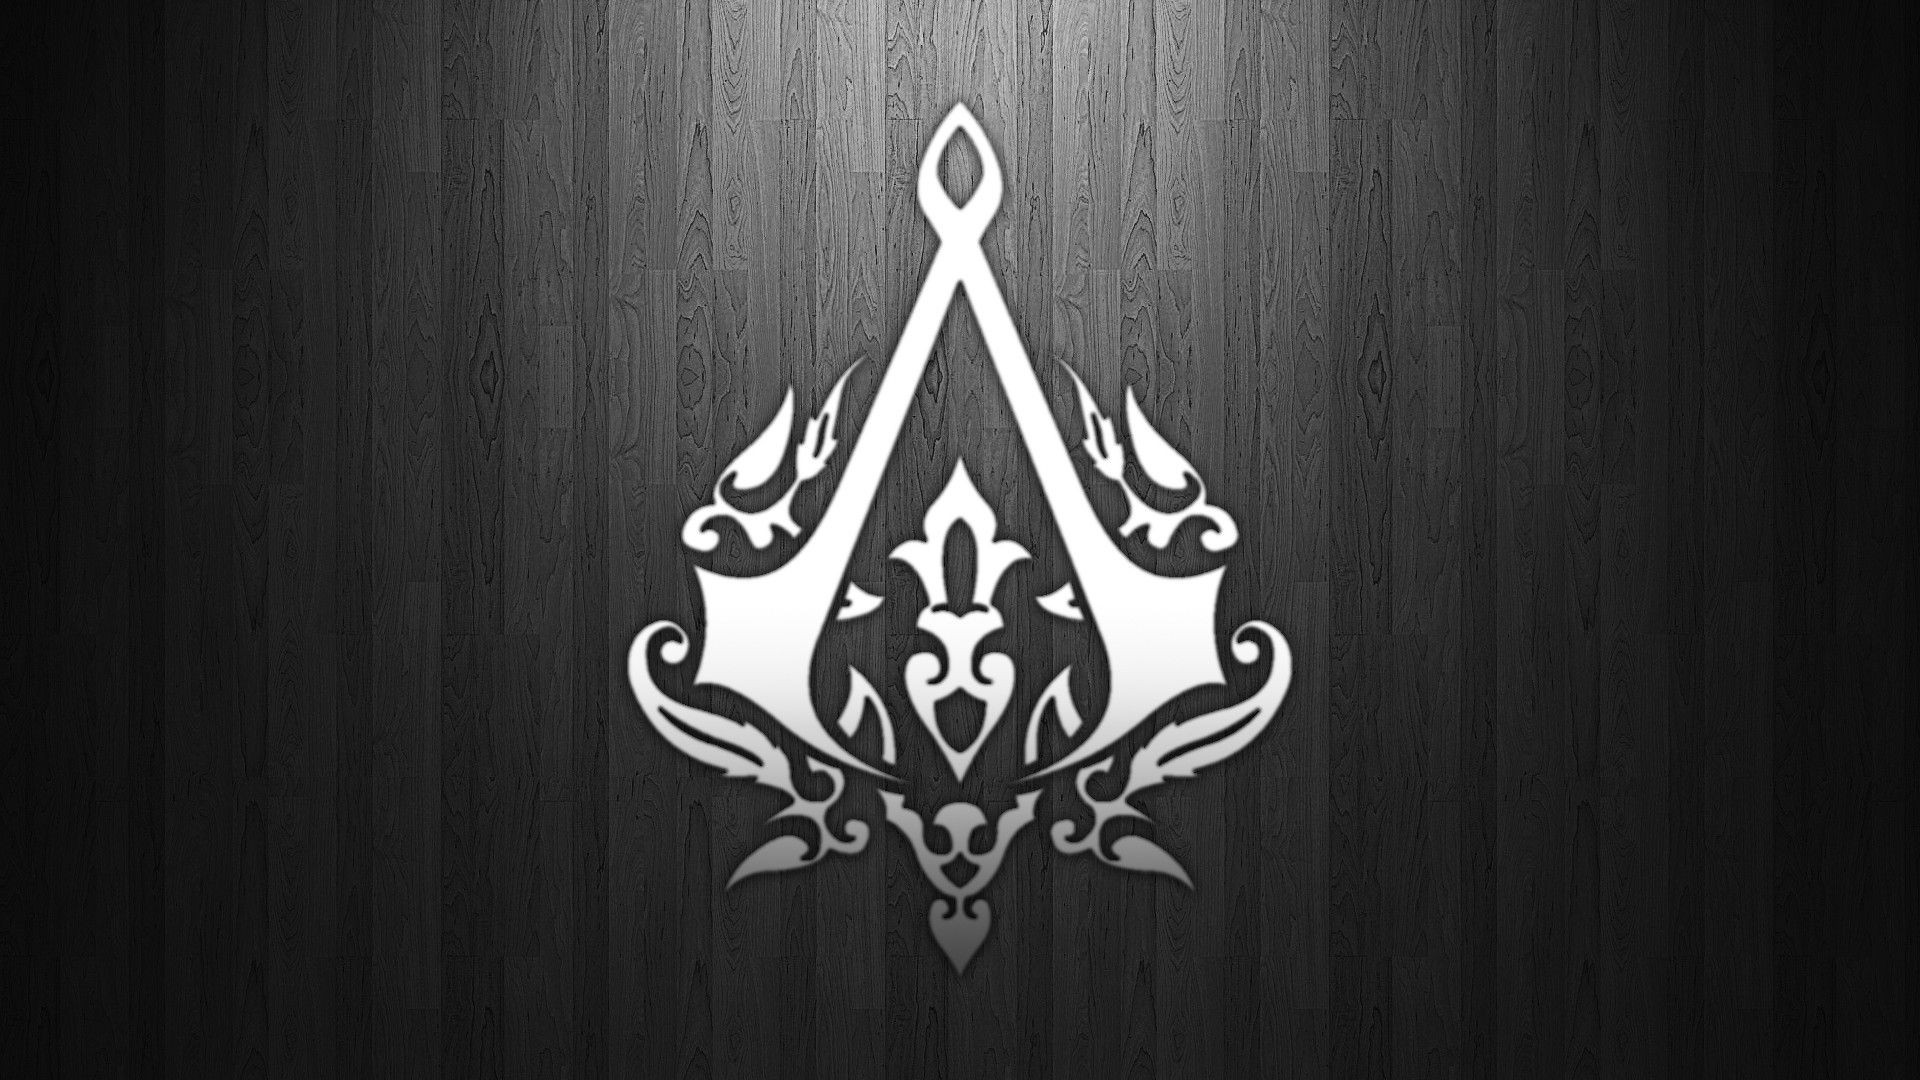 General 1920x1080 Assassin's Creed video game art video games wooden surface PC gaming